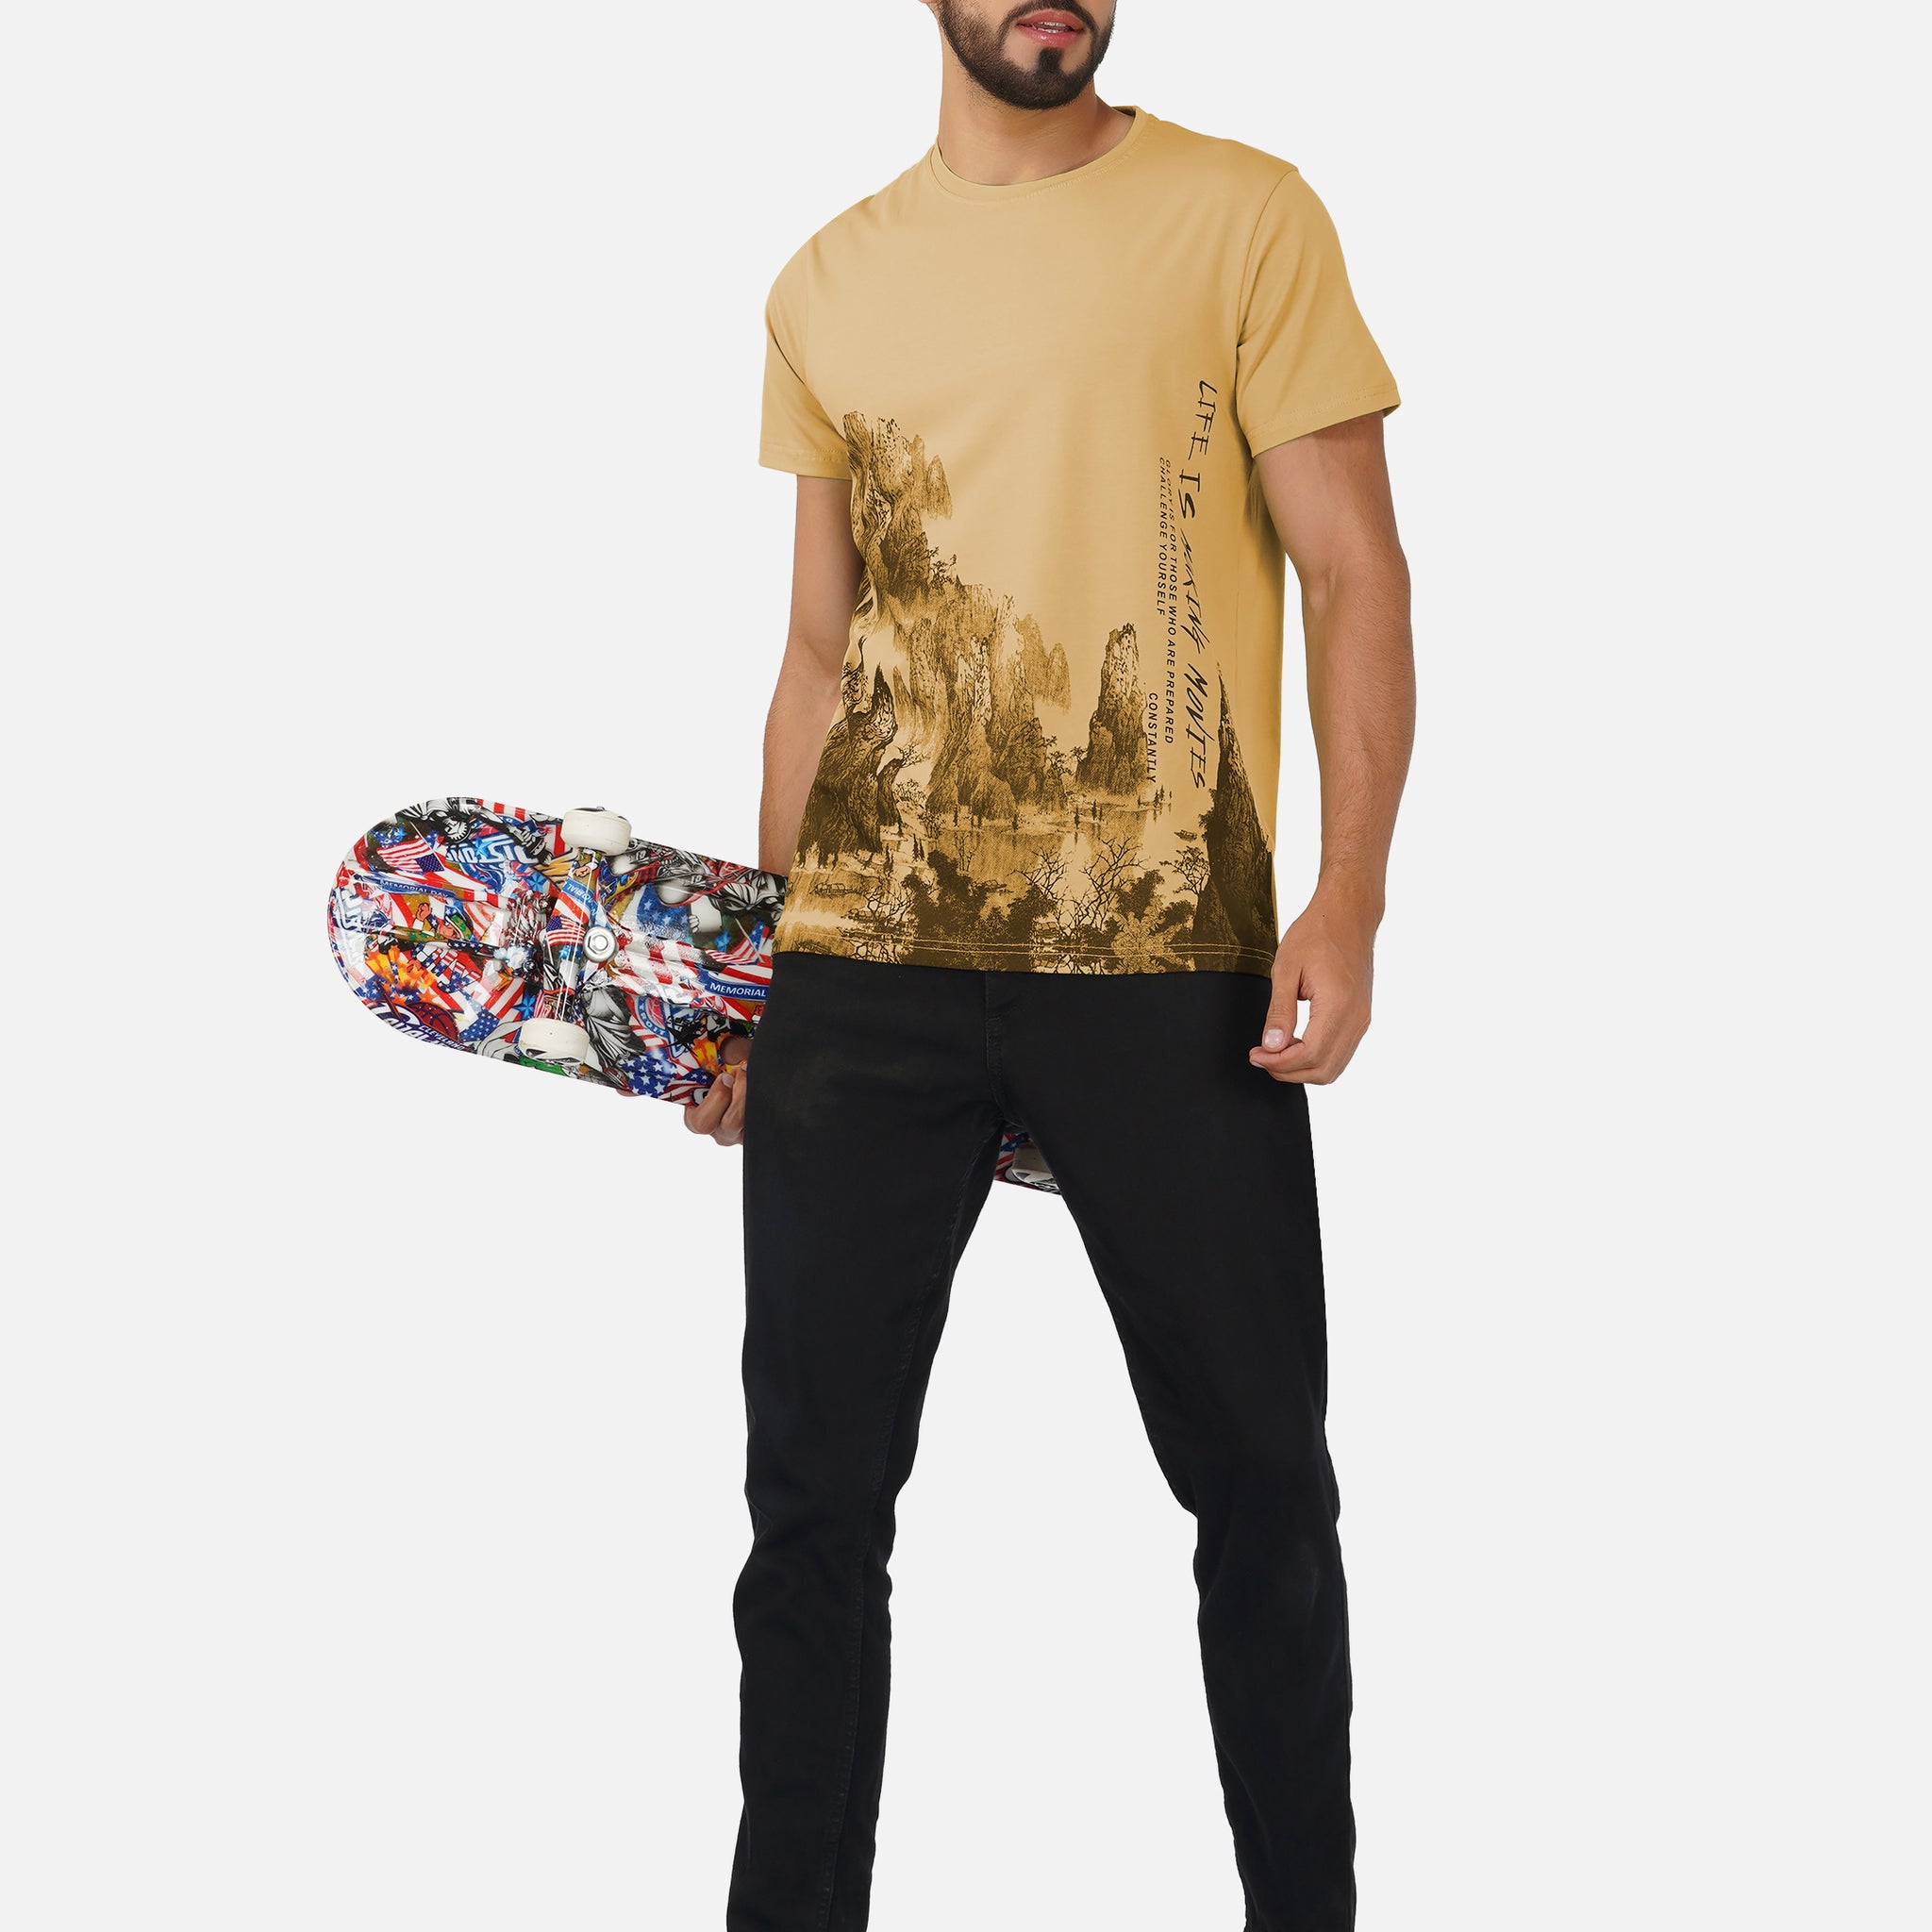 LIFE IS MAKING MOVIES MOUNTAIN PRINT ROUND NECK TSHIRT CAMEL COLOR